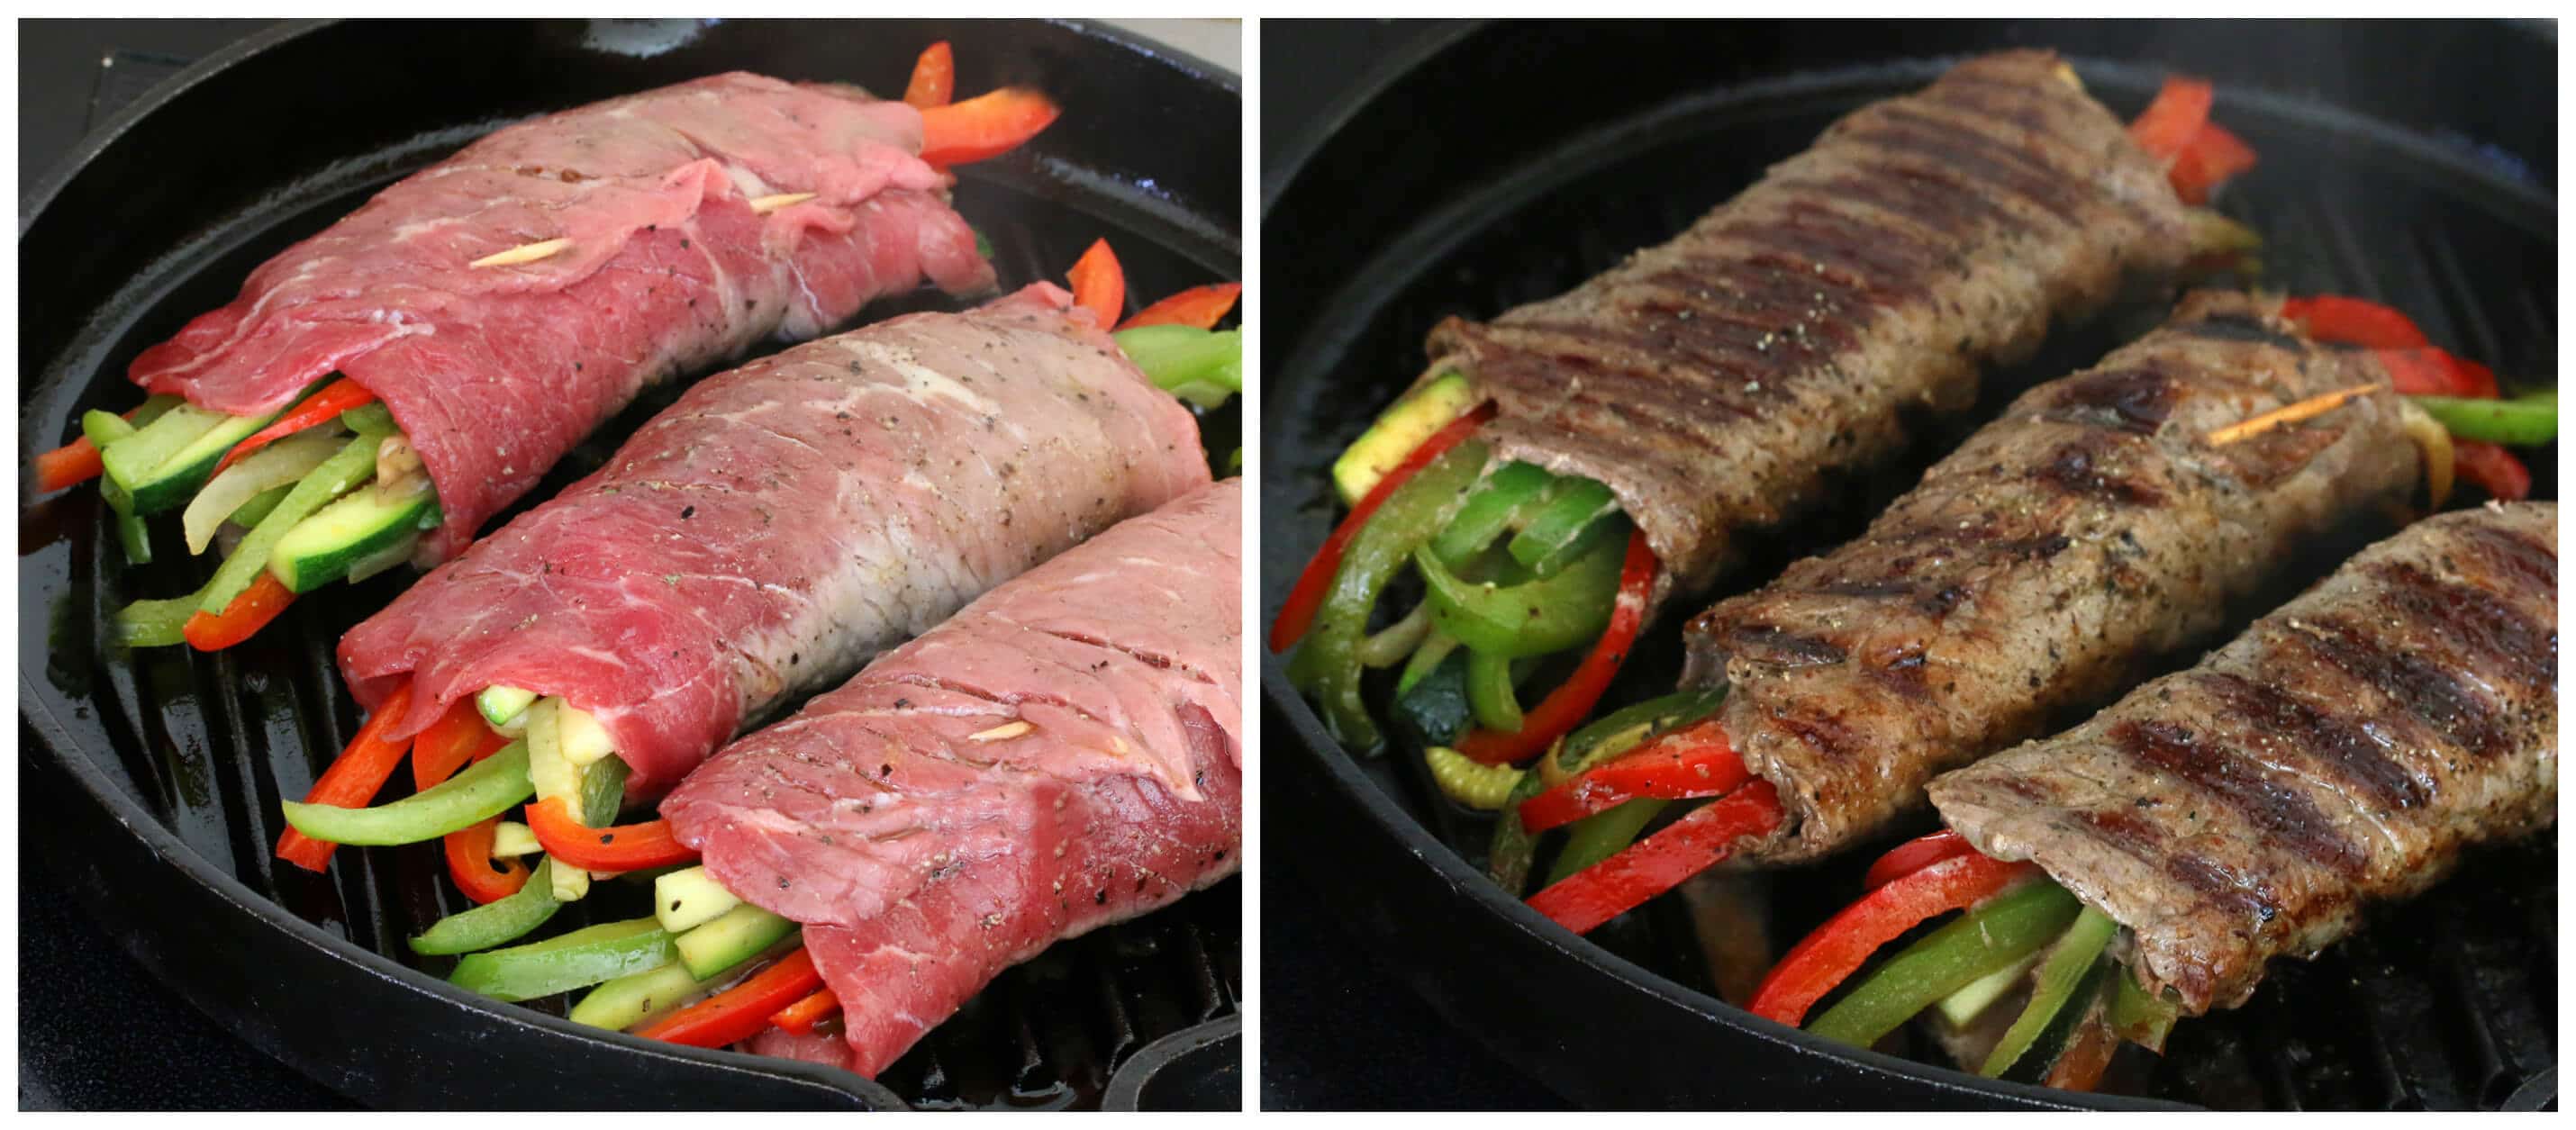 rosemary balsamic glazed steak rolls recipe vegetables healthy low carb low calorie bell peppers zucchini mushrooms